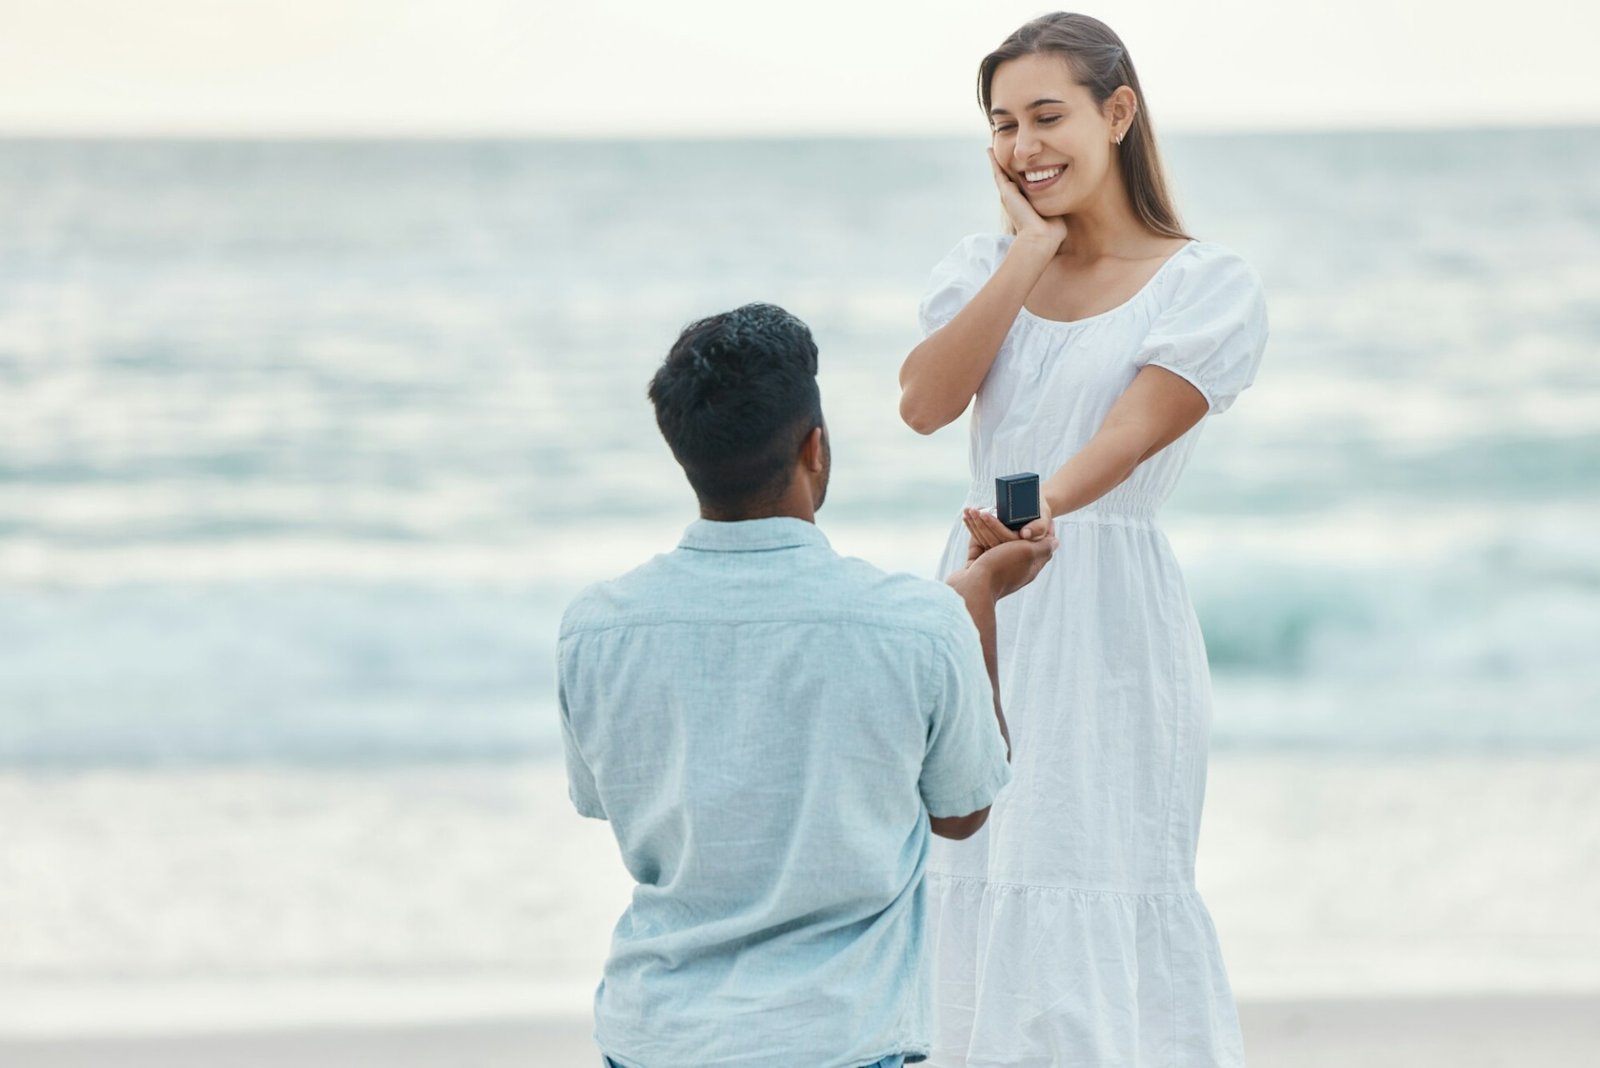 Love, beach and a proposal, a couple with engagement ring by the ocean. She said yes, woman and man